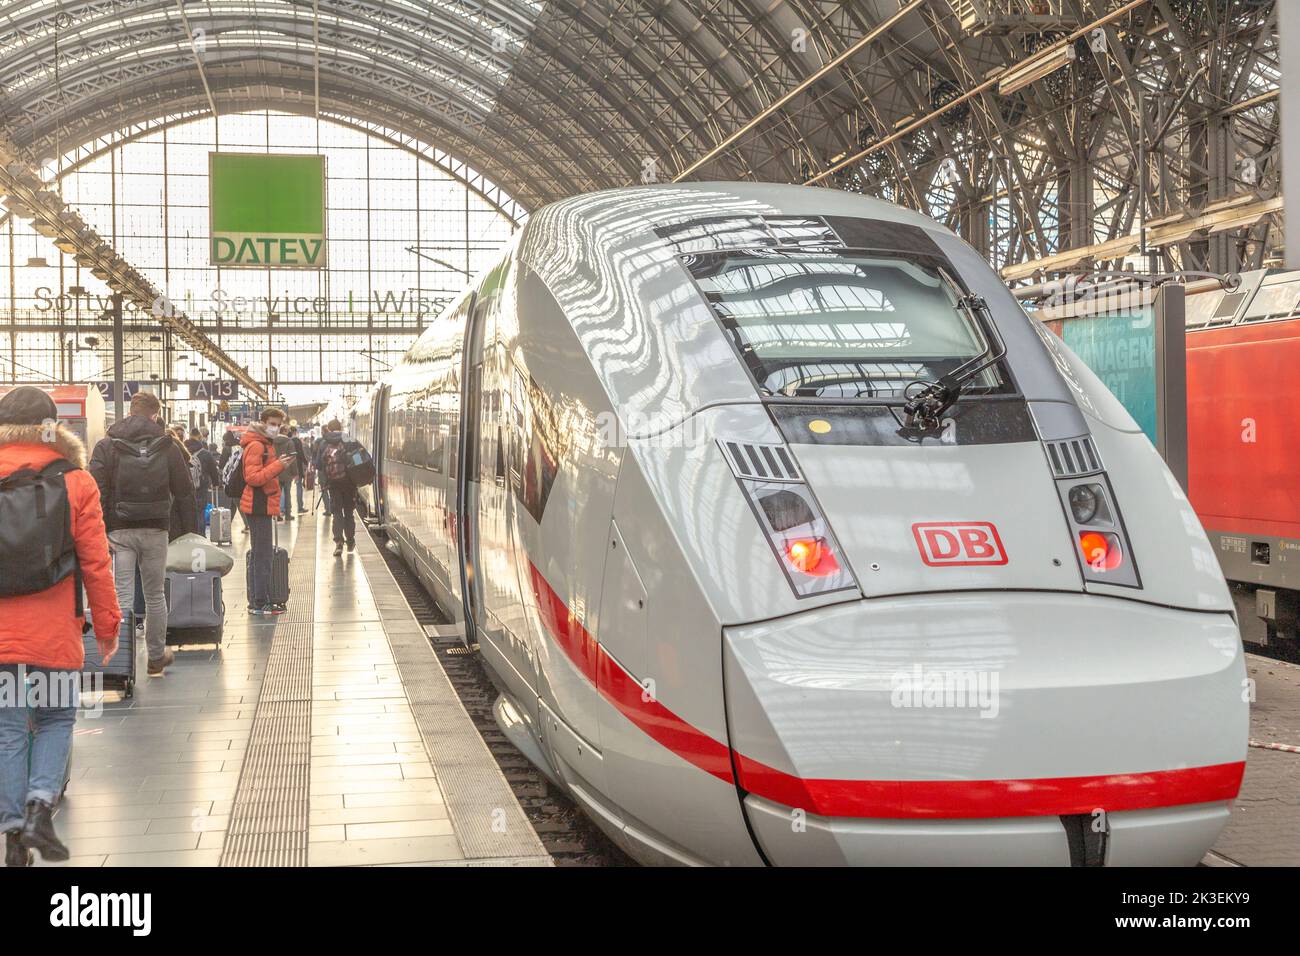 Frankfurt, Germany - December 22, 2021: people hurrying to the high speed train ICE at Frankfurt main station. Stock Photo